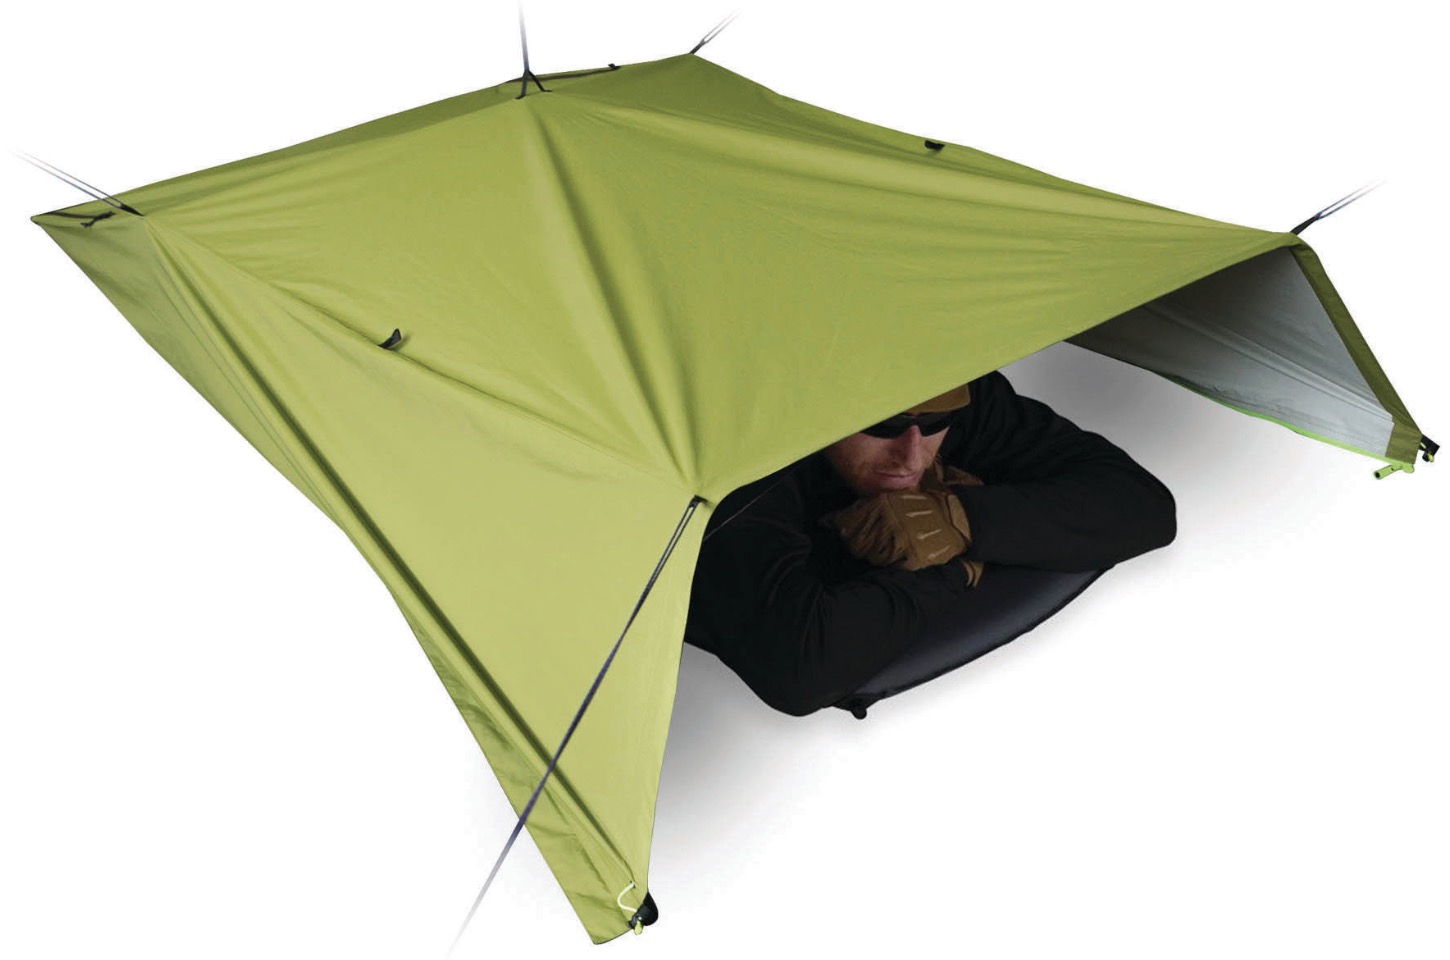 UKC Gear - PRODUCT NEWS: Outdoor Research's new Wilderness Cover